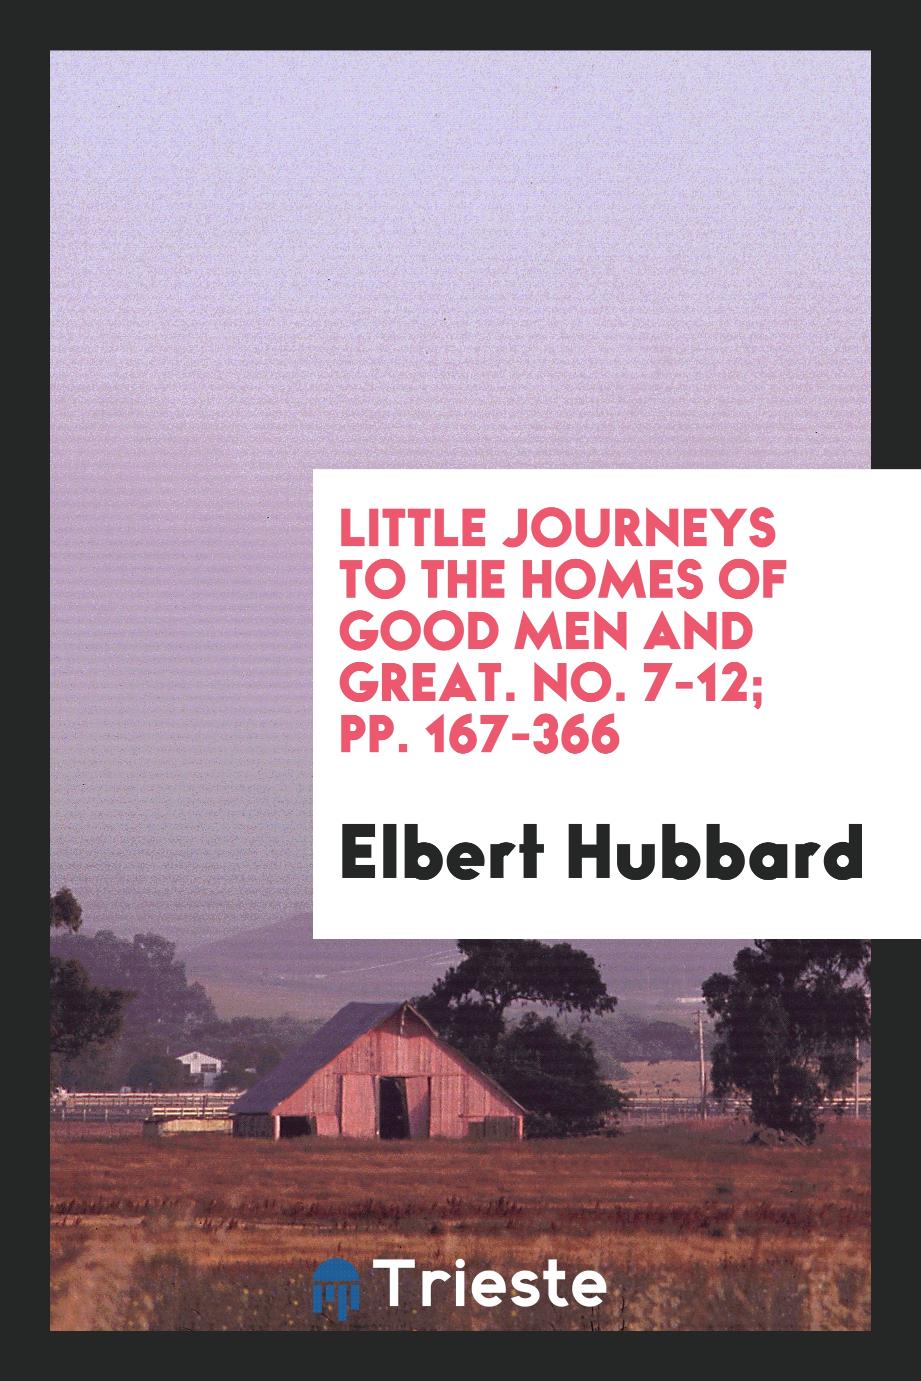 Little journeys to the homes of good men and great. No. 7-12; pp. 167-366